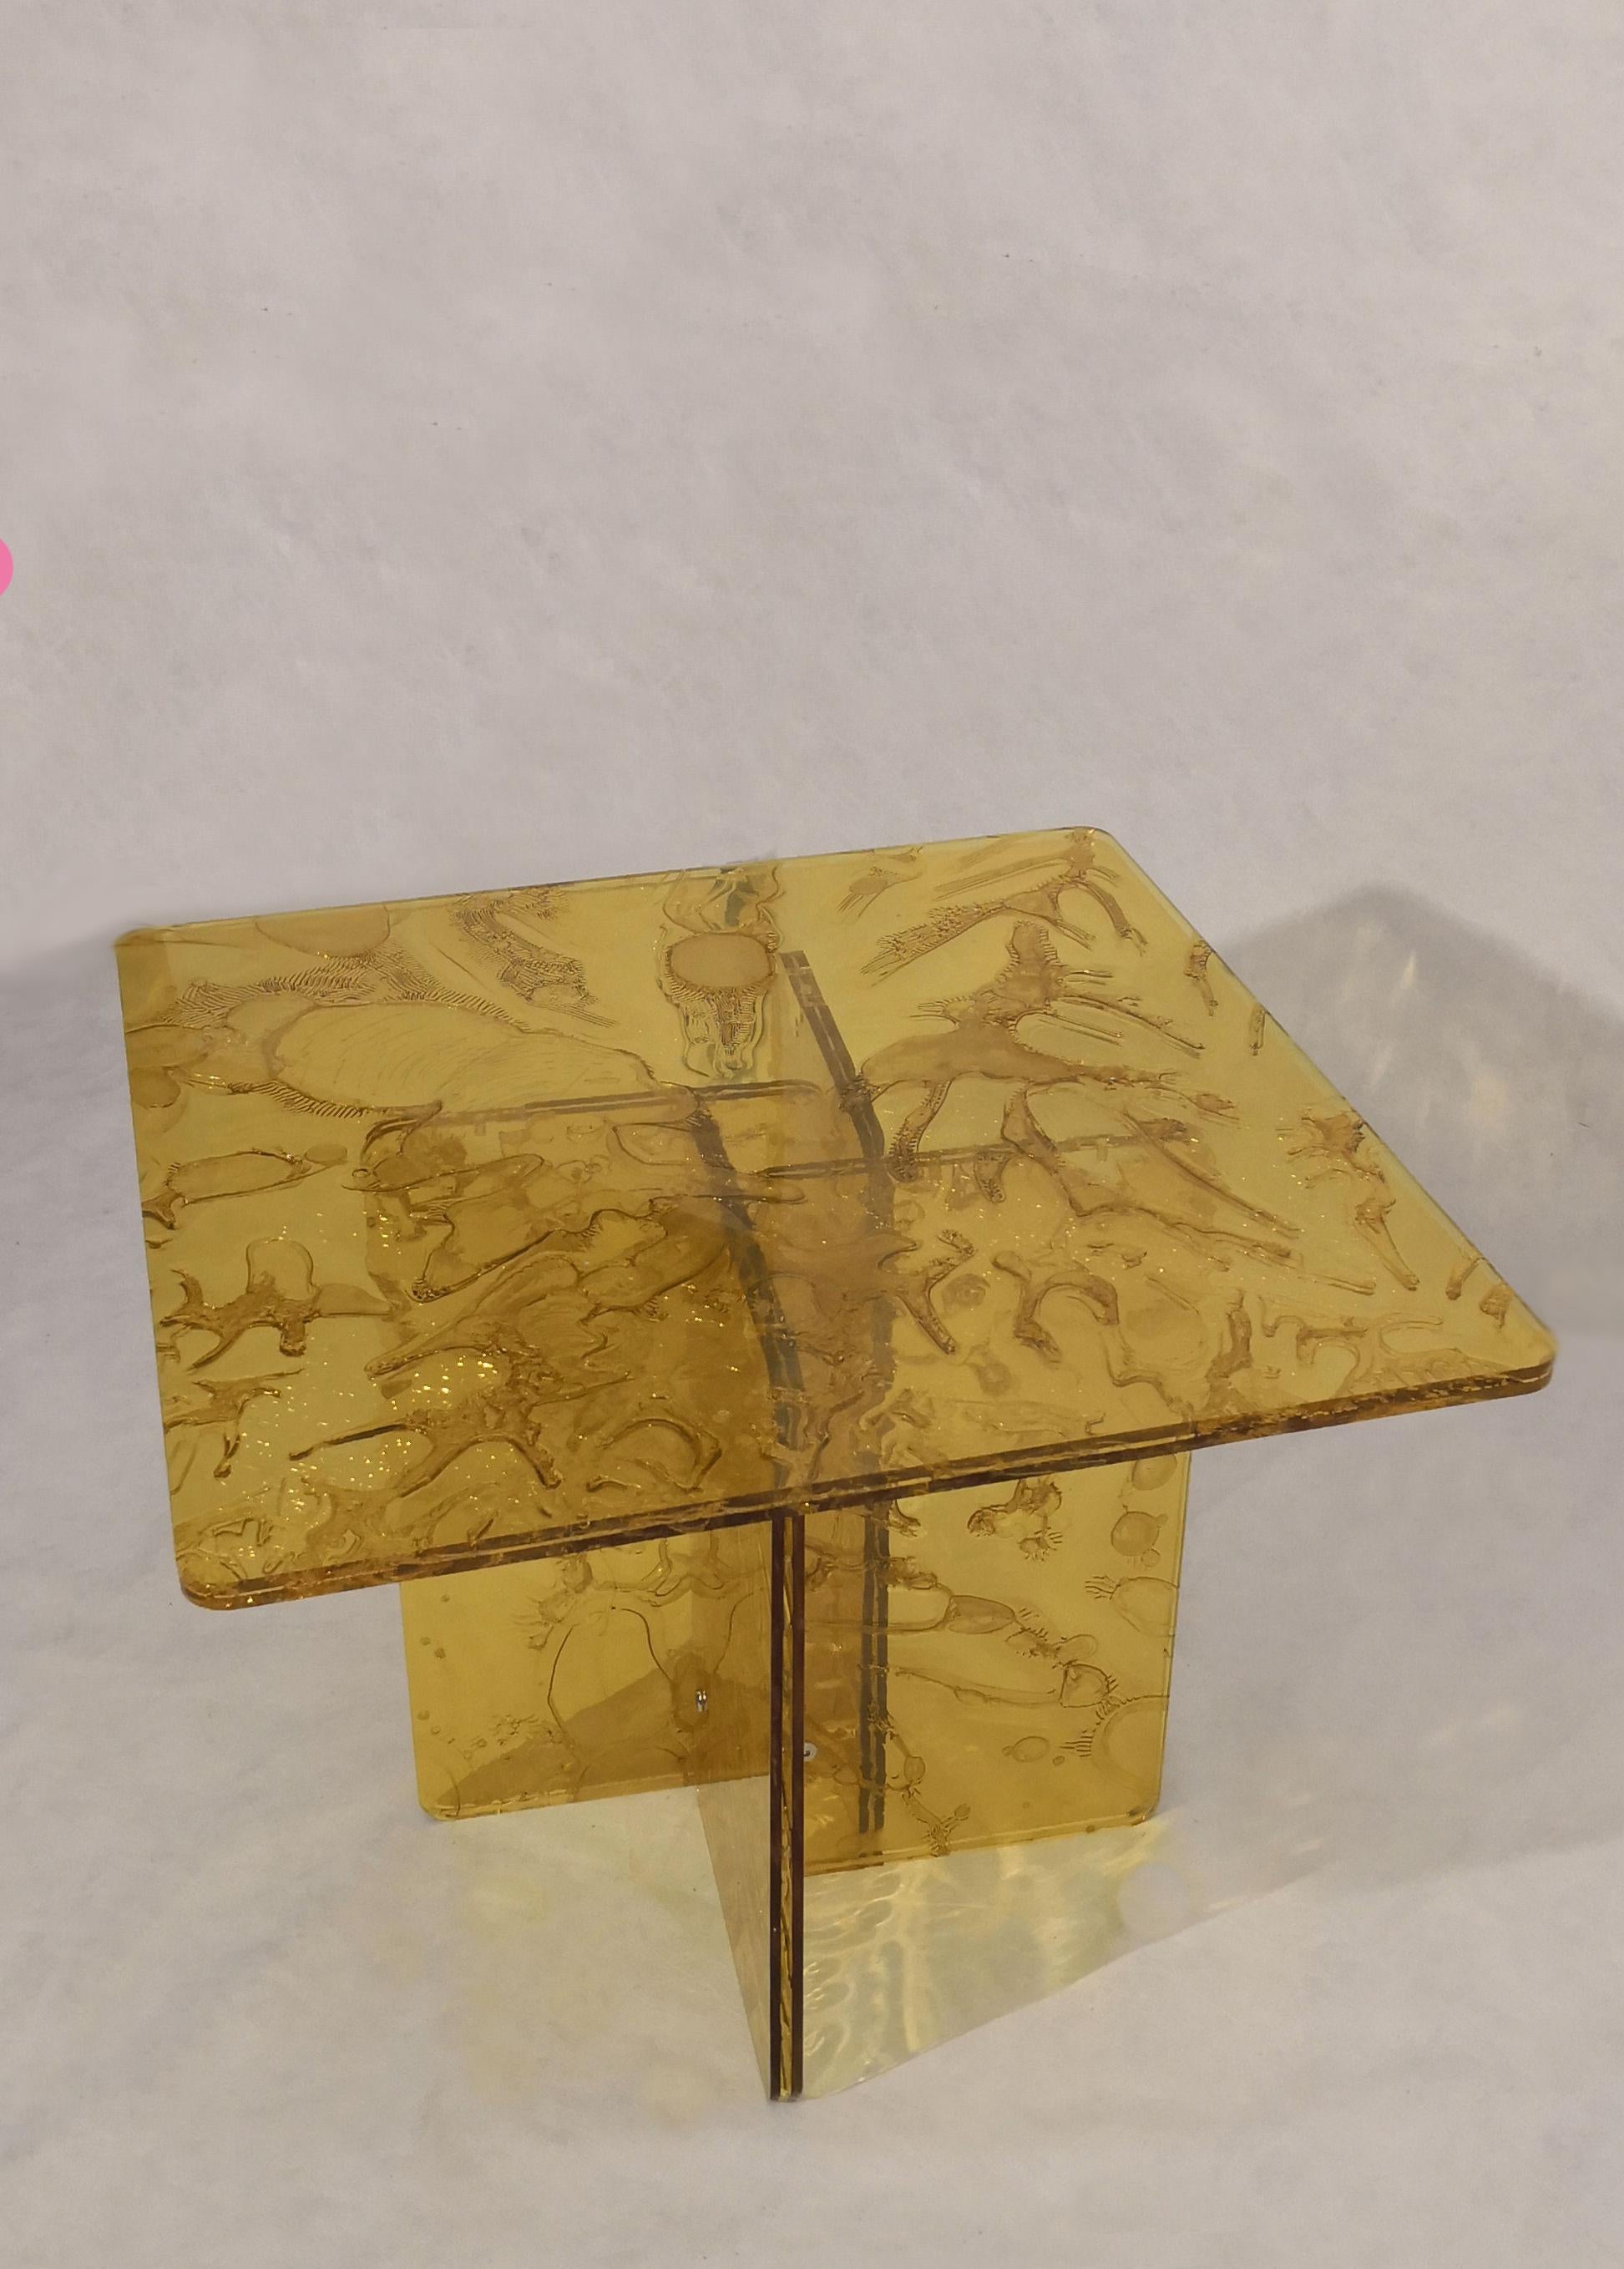 Sketch Quadro Sidetable Made of Yellow Acrylic Des. Roberto Giacomucci in 2022 For Sale 3